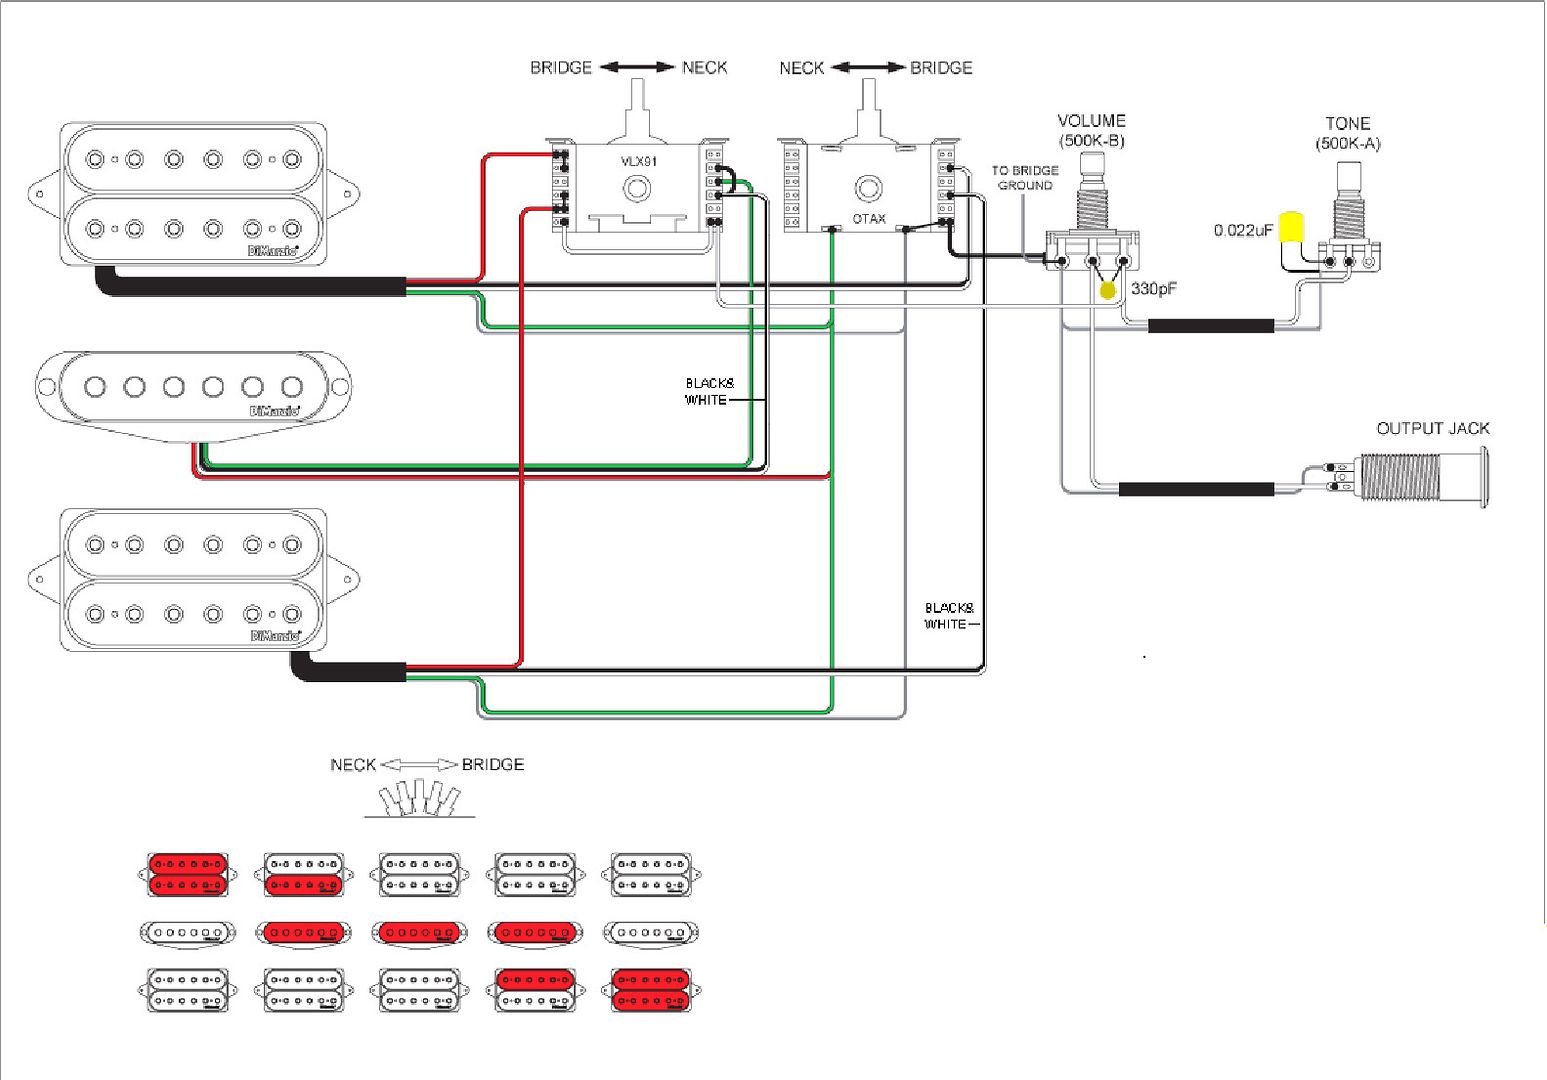 liquifire and crunchlab wiring diagram